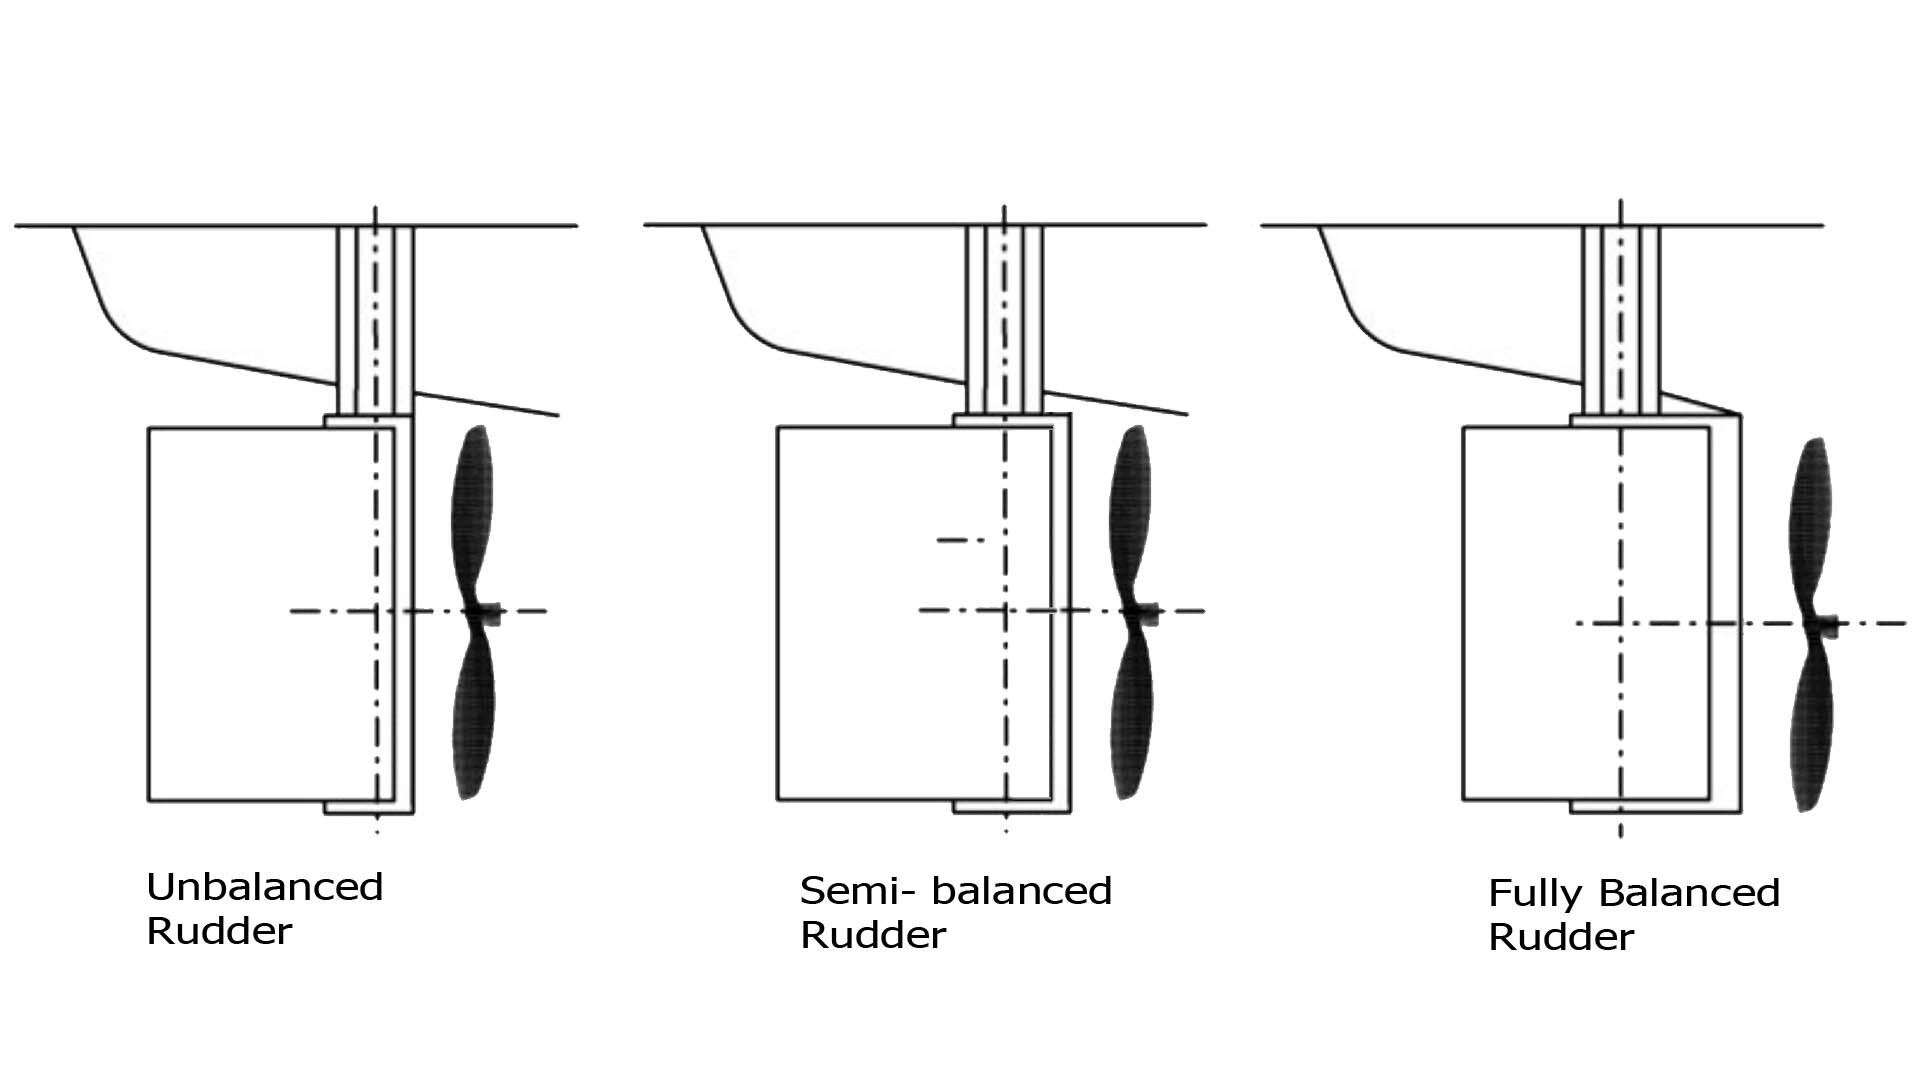 Conventional types of rudder: Unbalanced, Semi-balanced, Balanced. All three showing the position of the rudder stock on its blade.